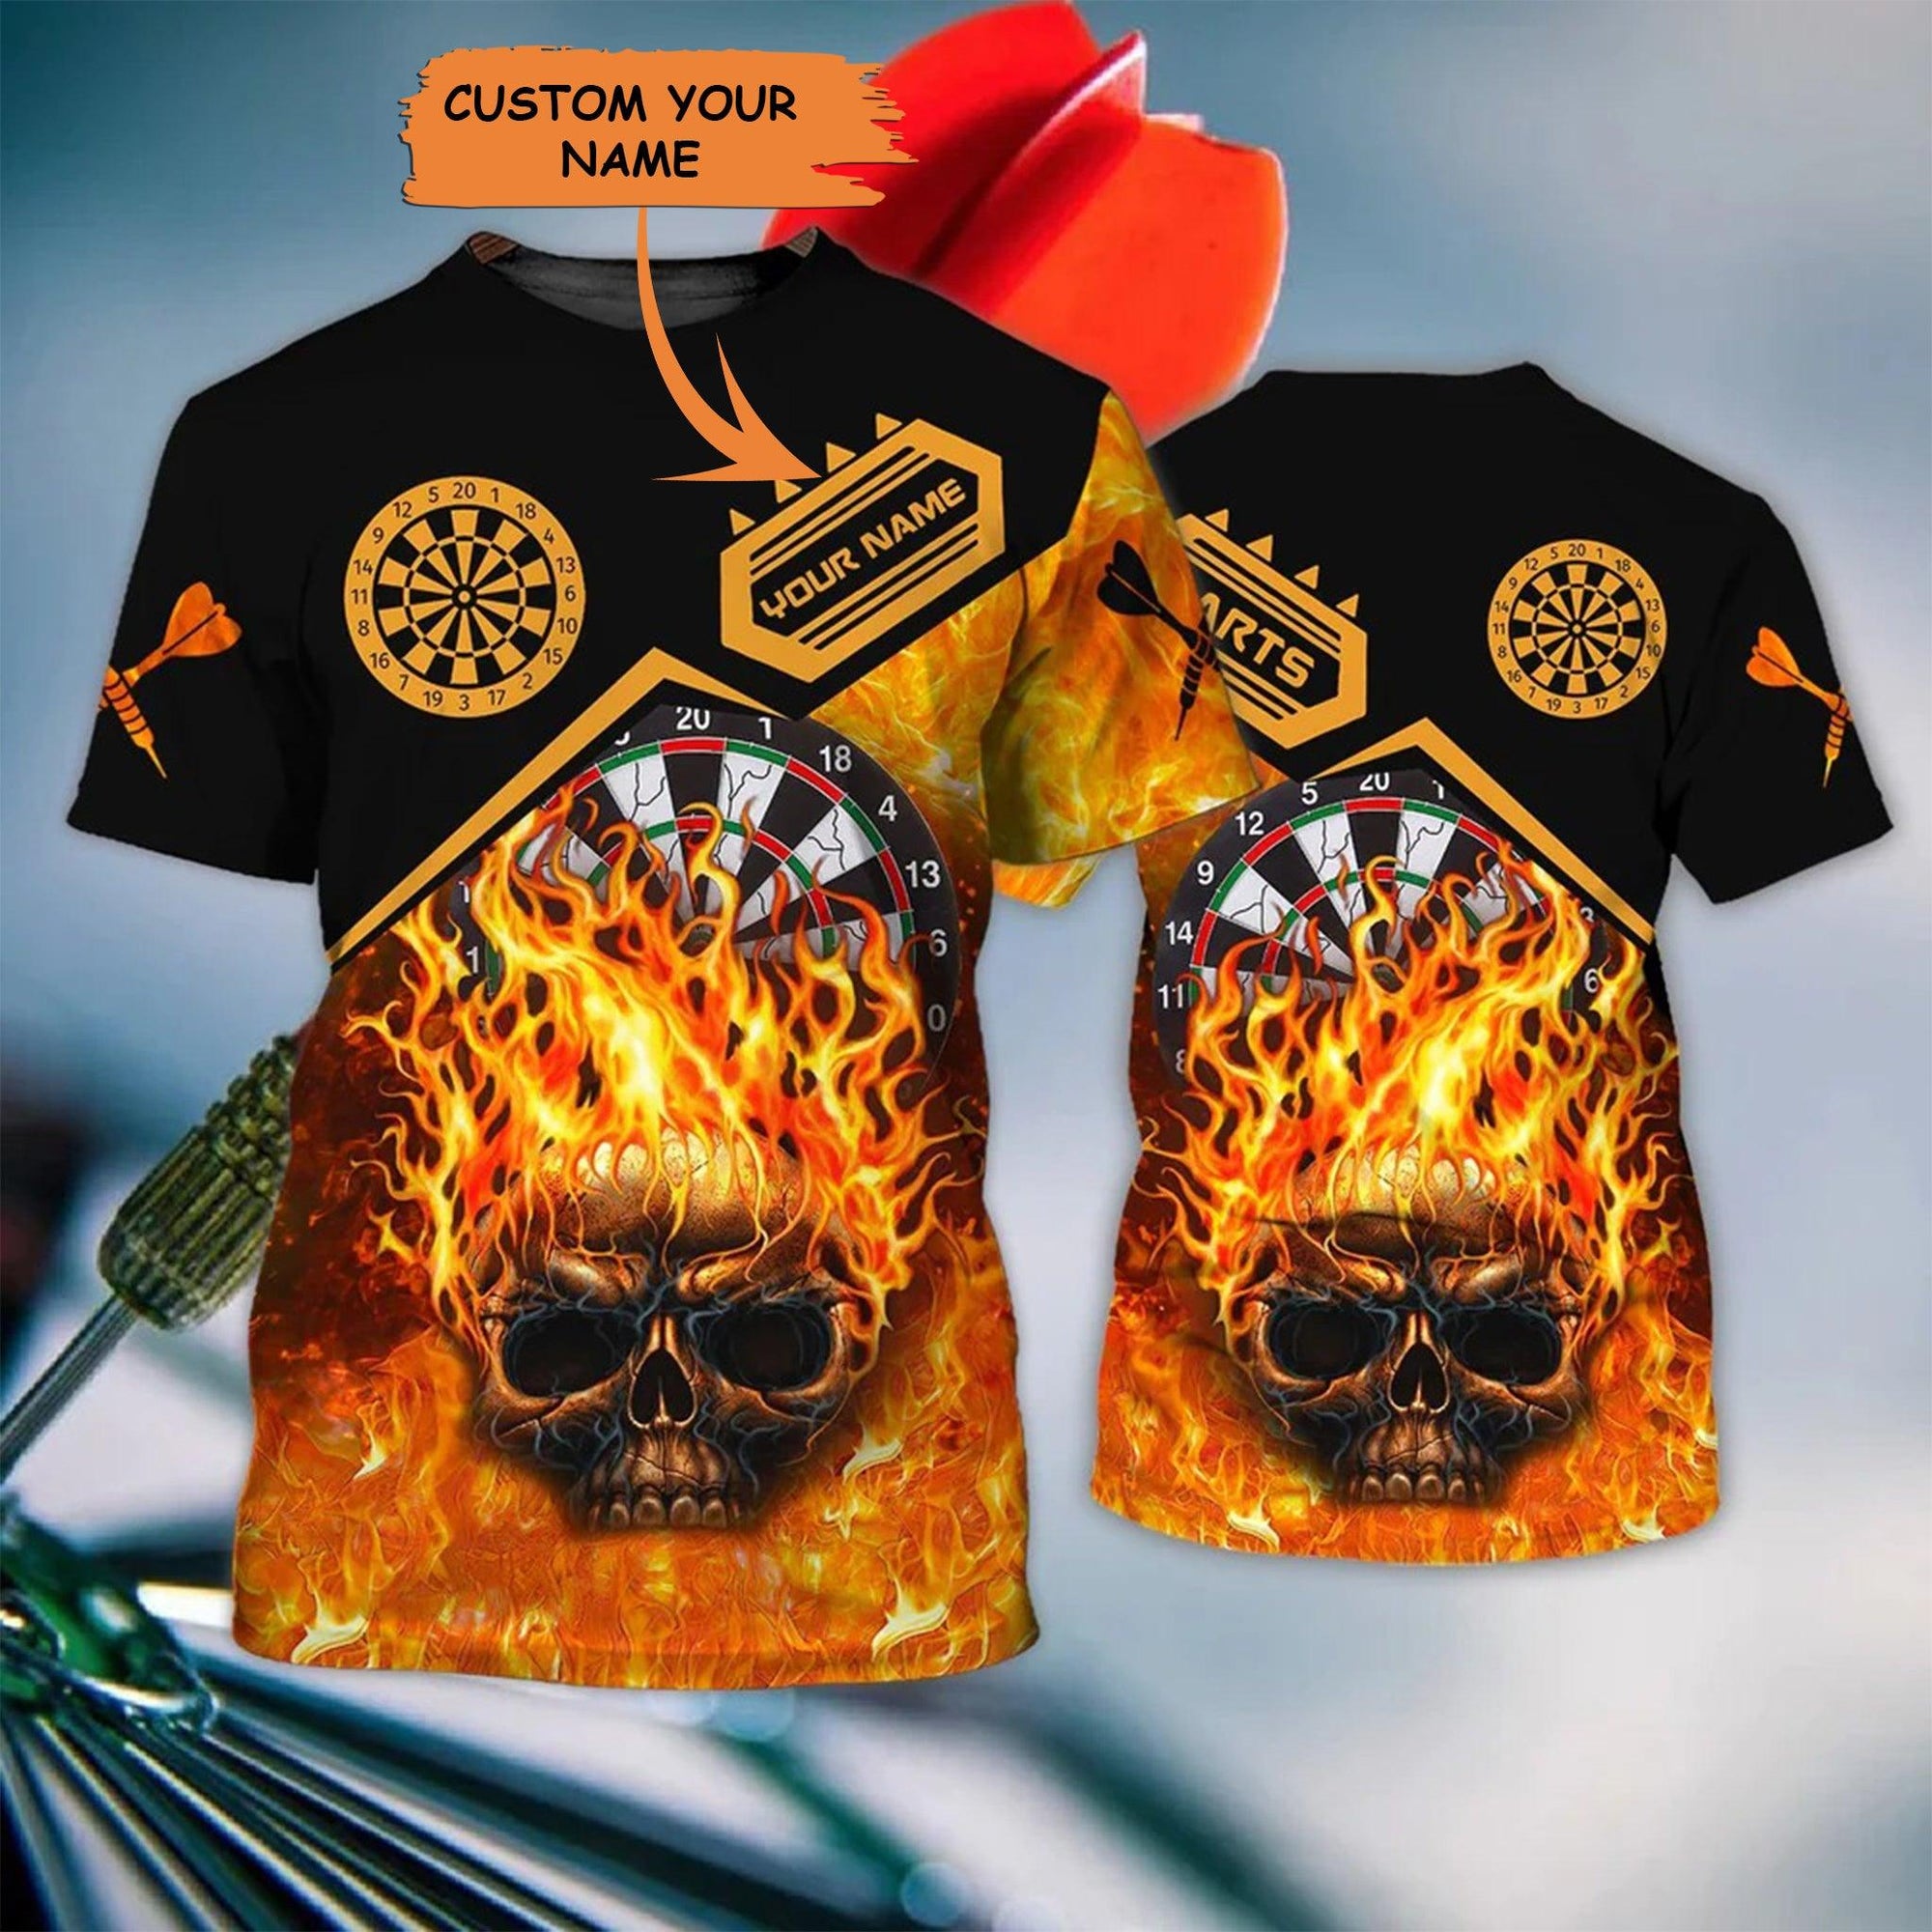 Customized Darts T Shirt, Darts Skull Flame, Personalized Name Darts T Shirt For Men - Perfect Gift For Darts Lovers, Darts Players - Amzanimalsgift